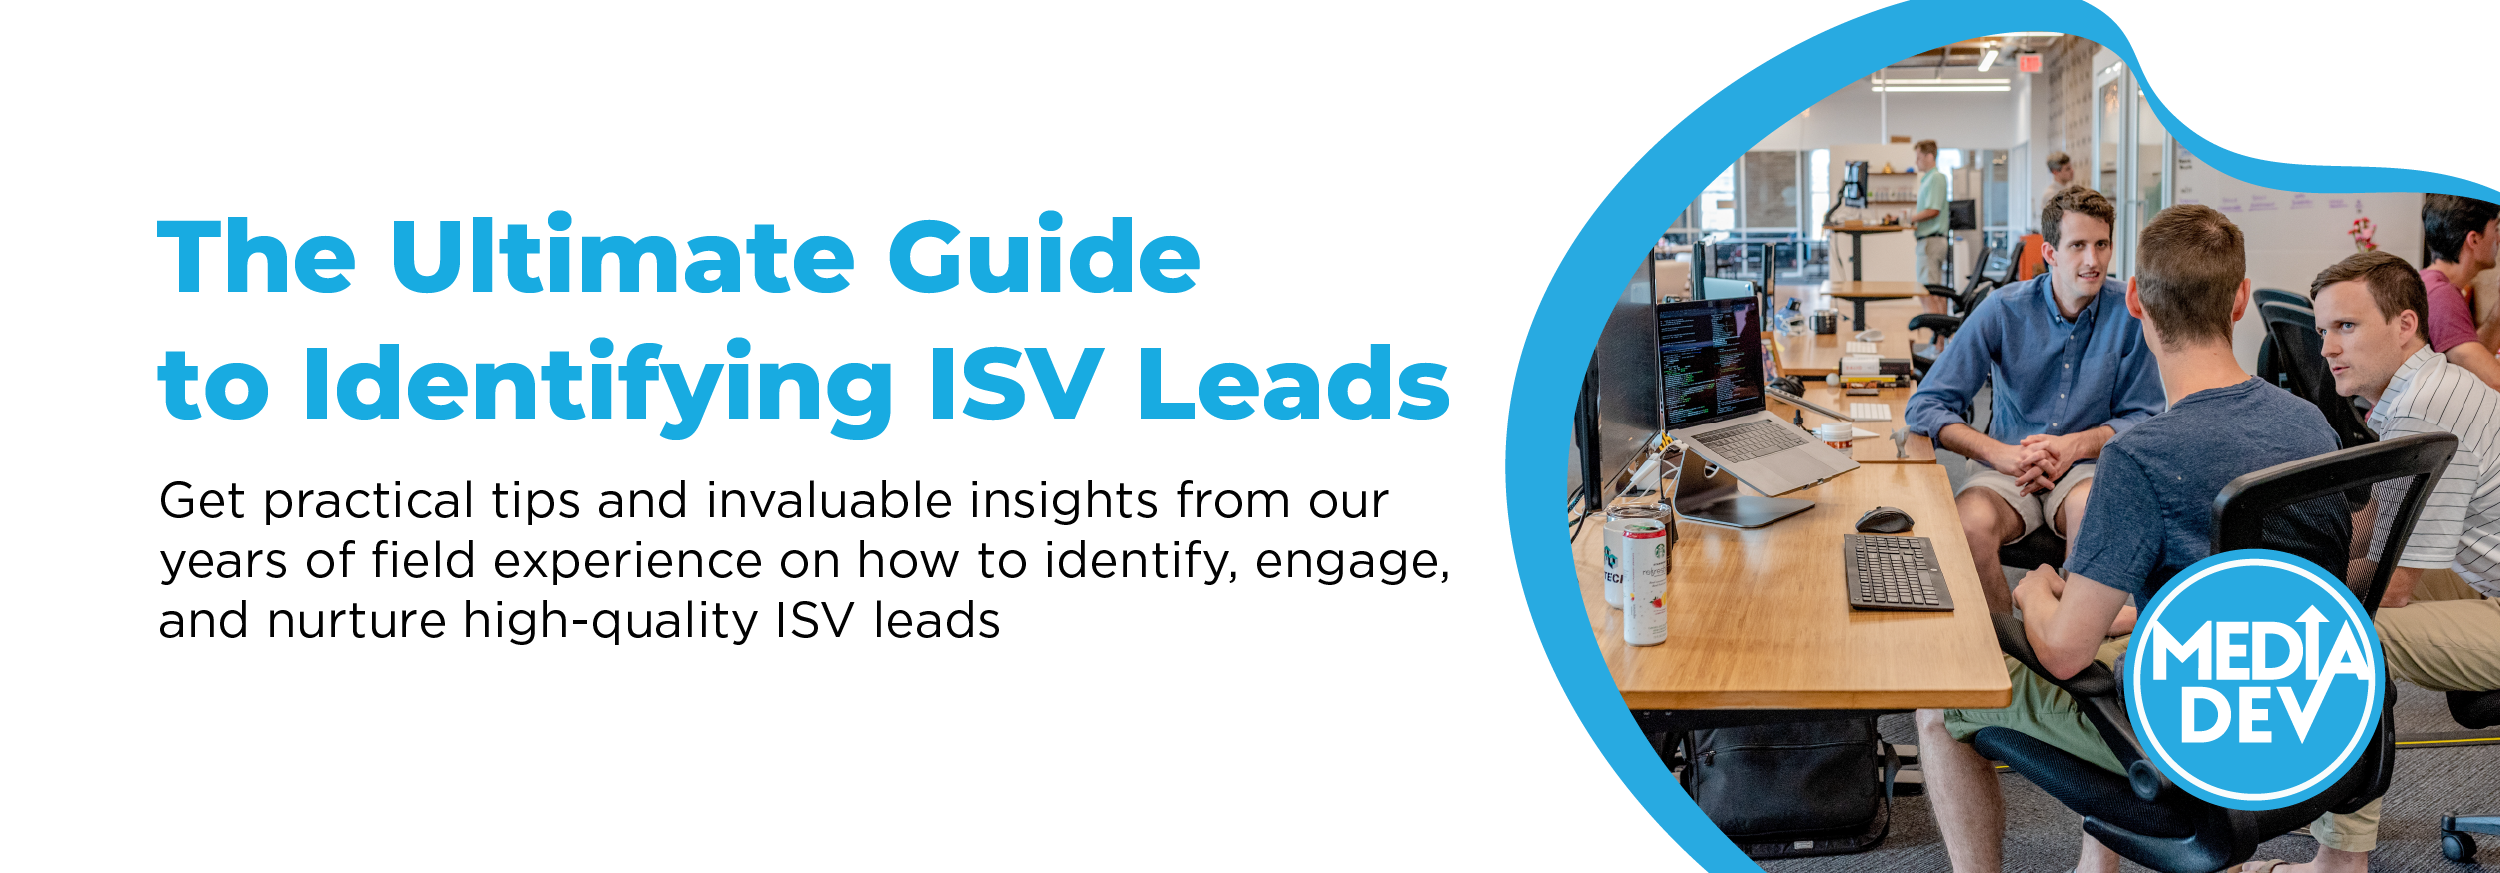 Ultimate Guide to Identifying ISV Leads